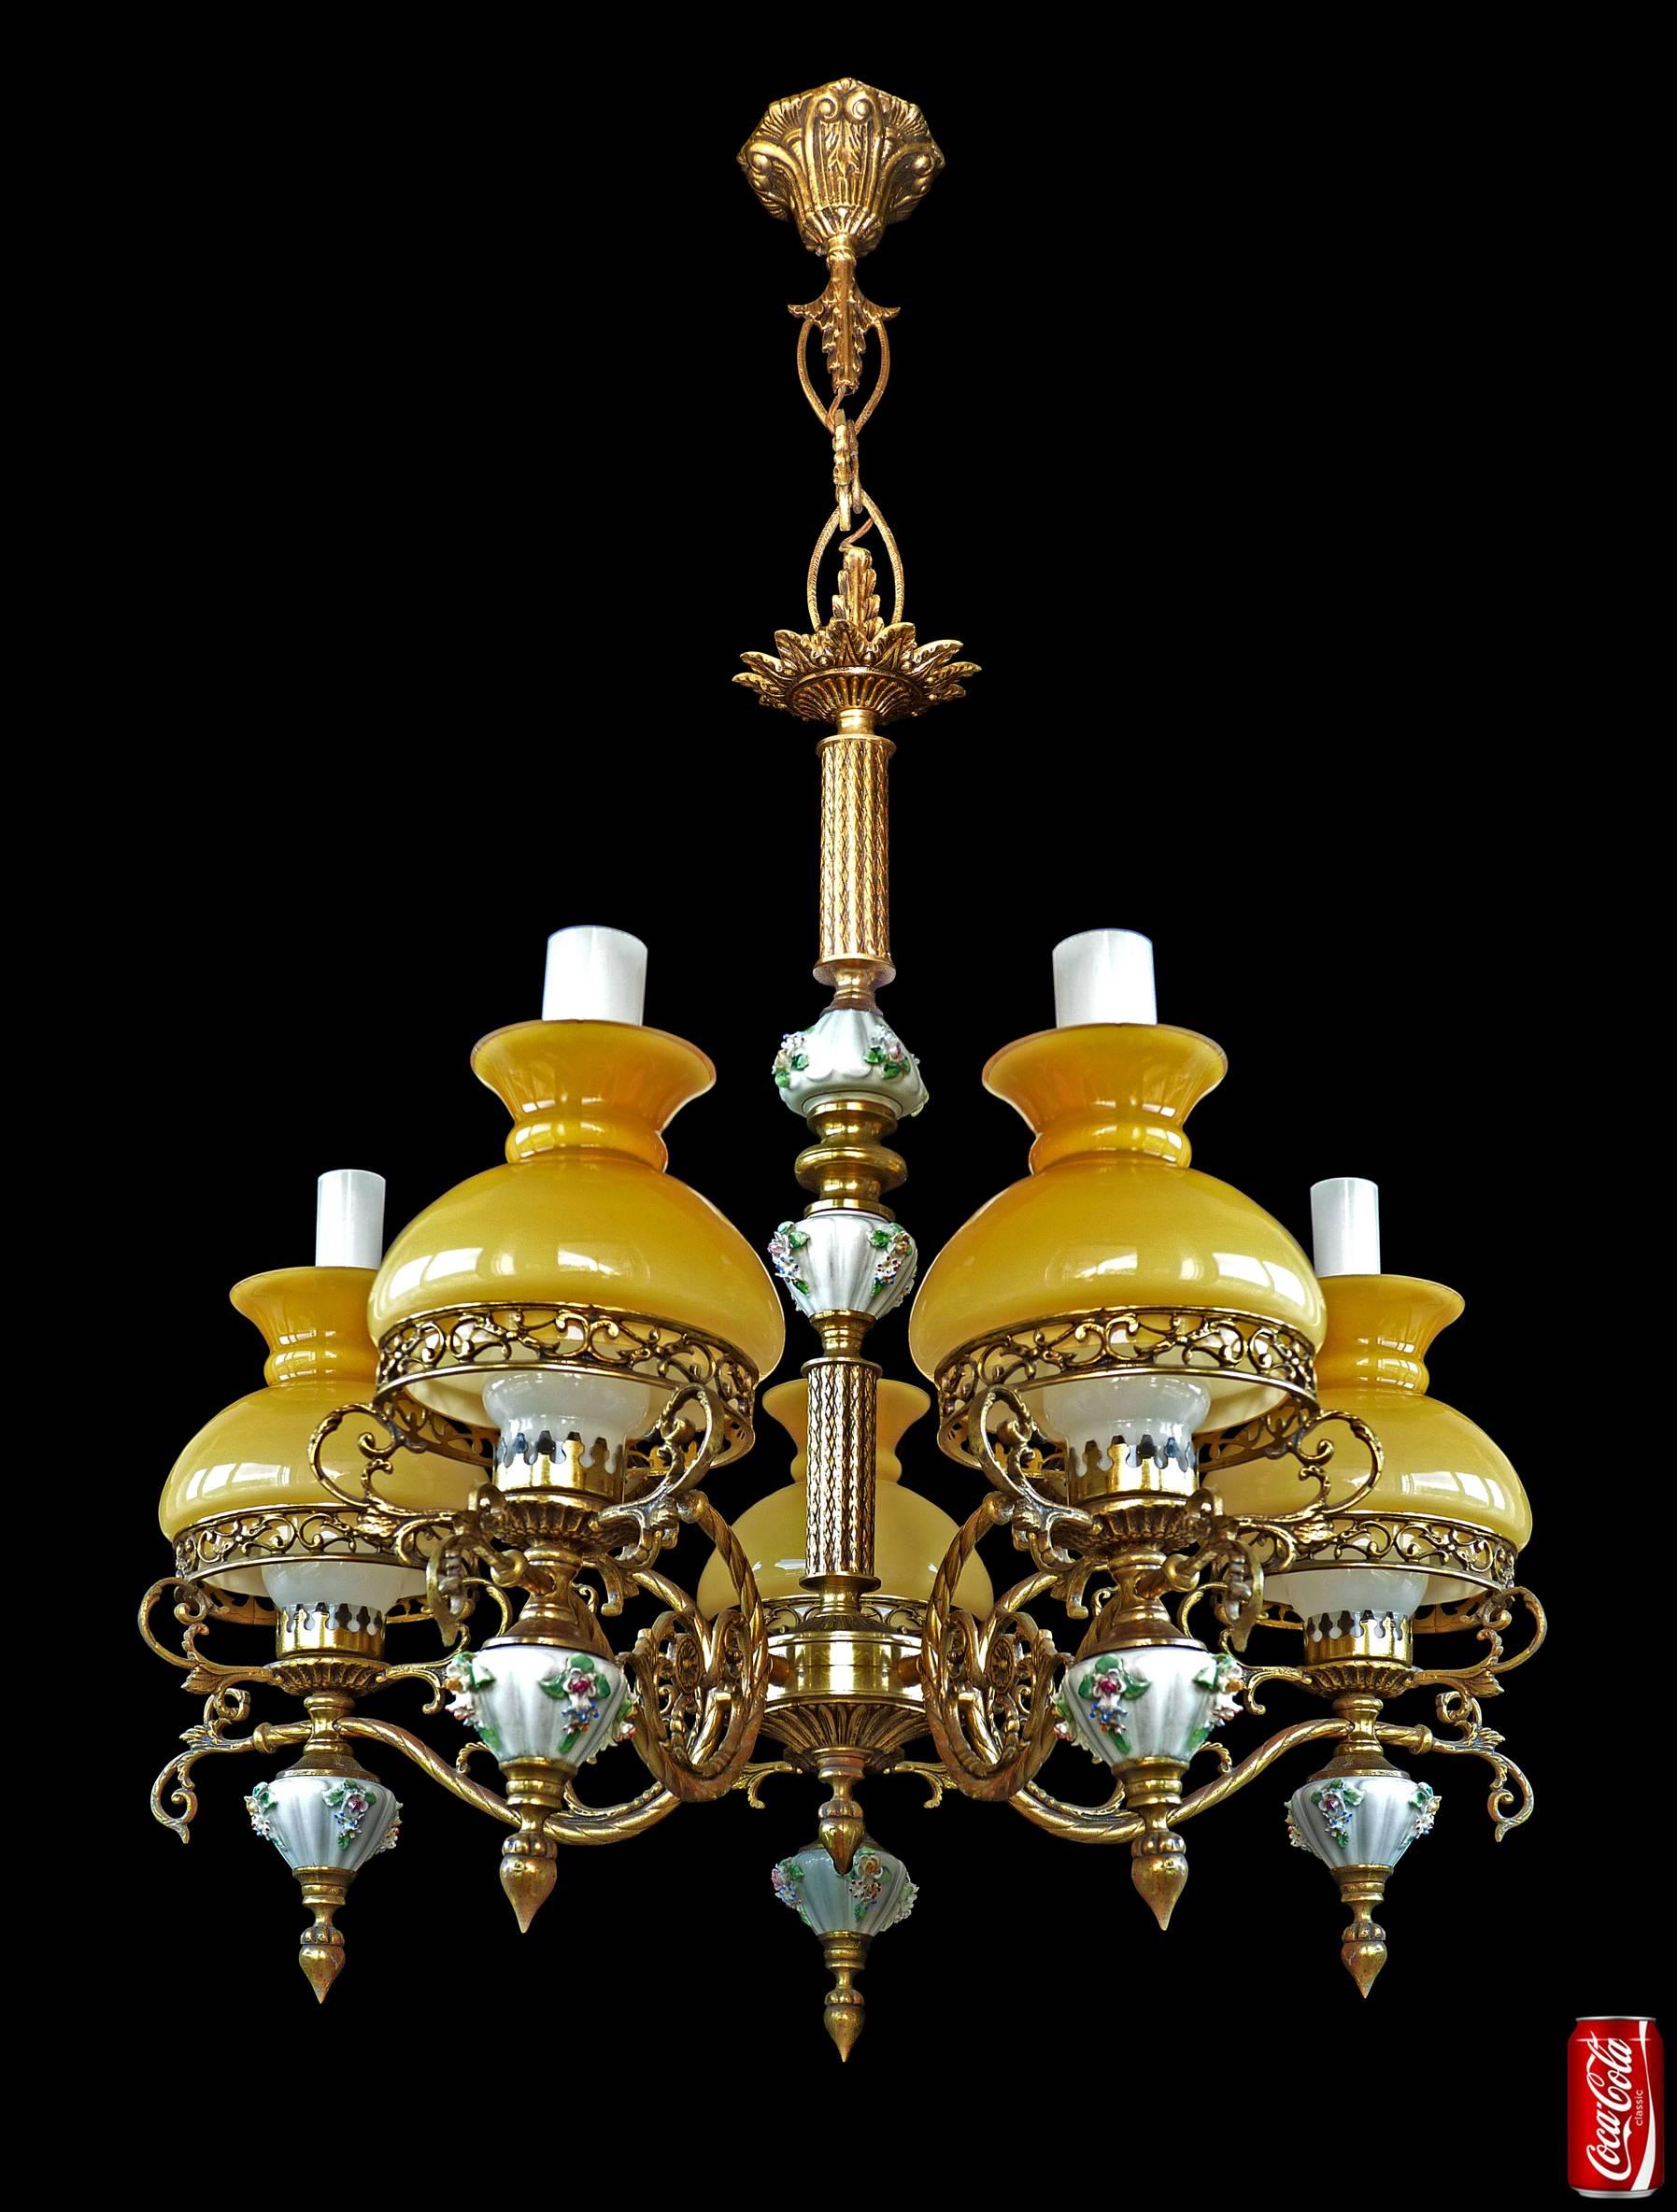 Gilt French Victorian Chandelier Porcelain Limoges Style, Gilded Bronze & Amber Glass